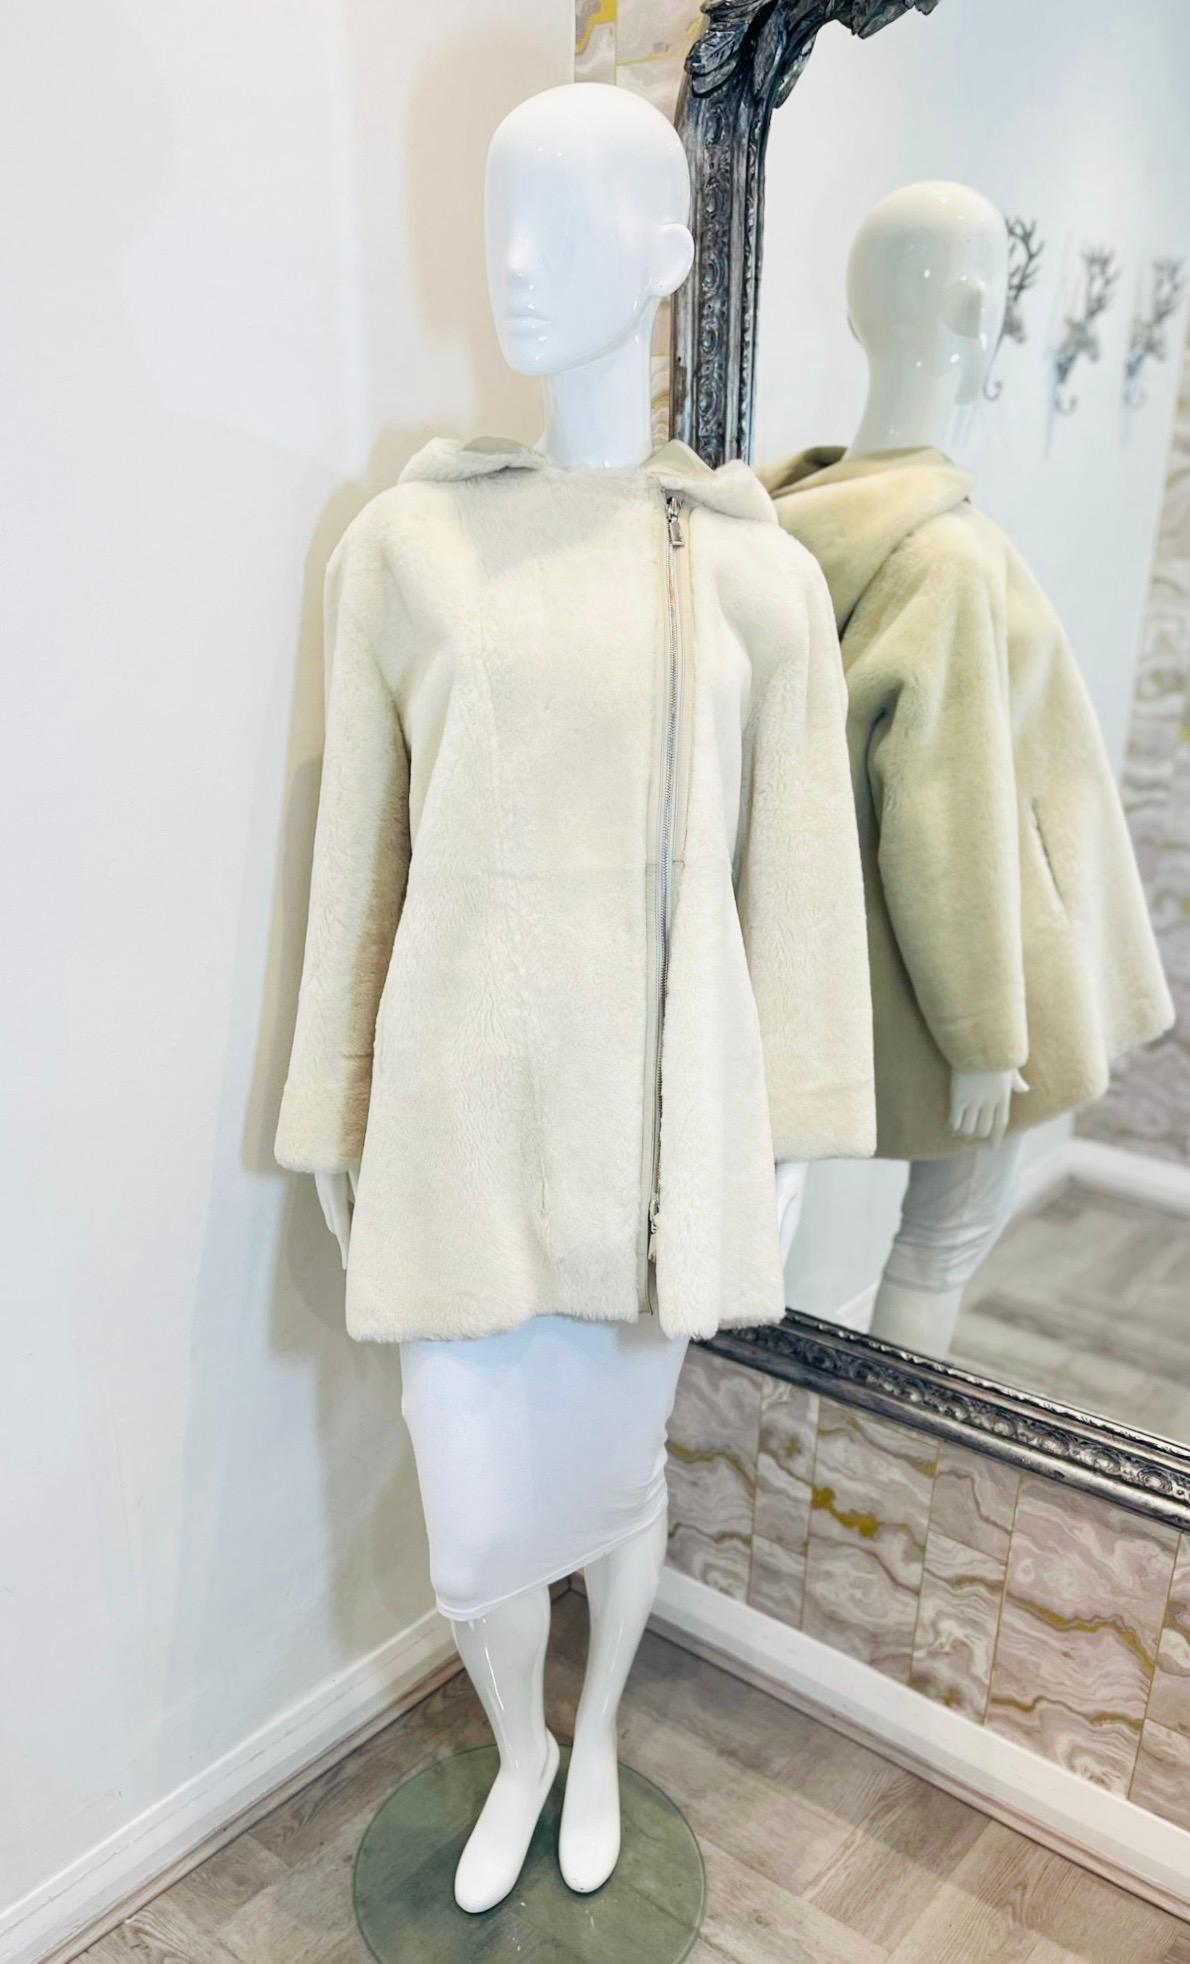 Max & Moi Reversible Merino Shearling Coat In Excellent Condition For Sale In London, GB